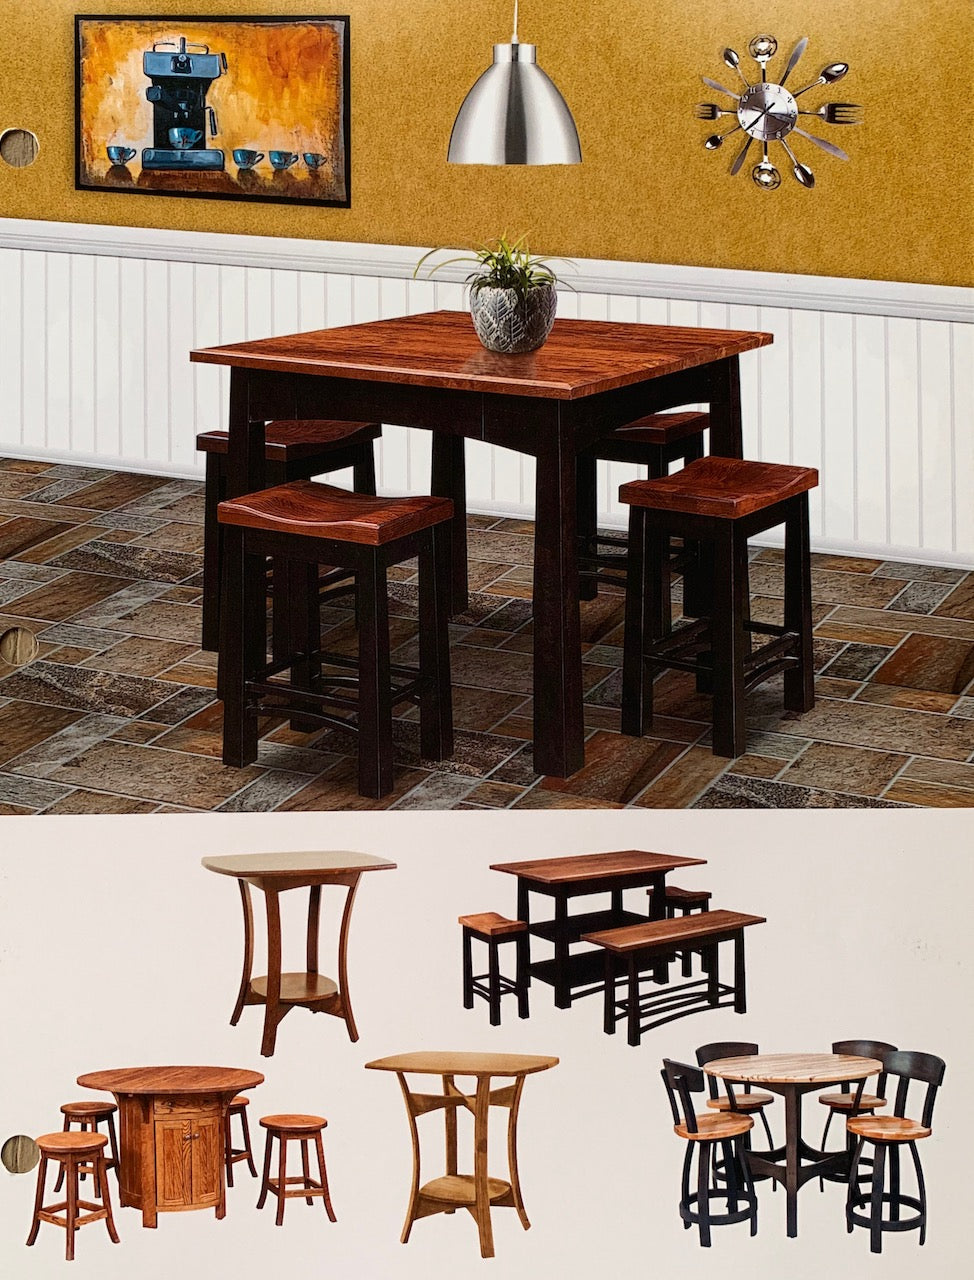 Auglaize Gathering Table and Chair Set